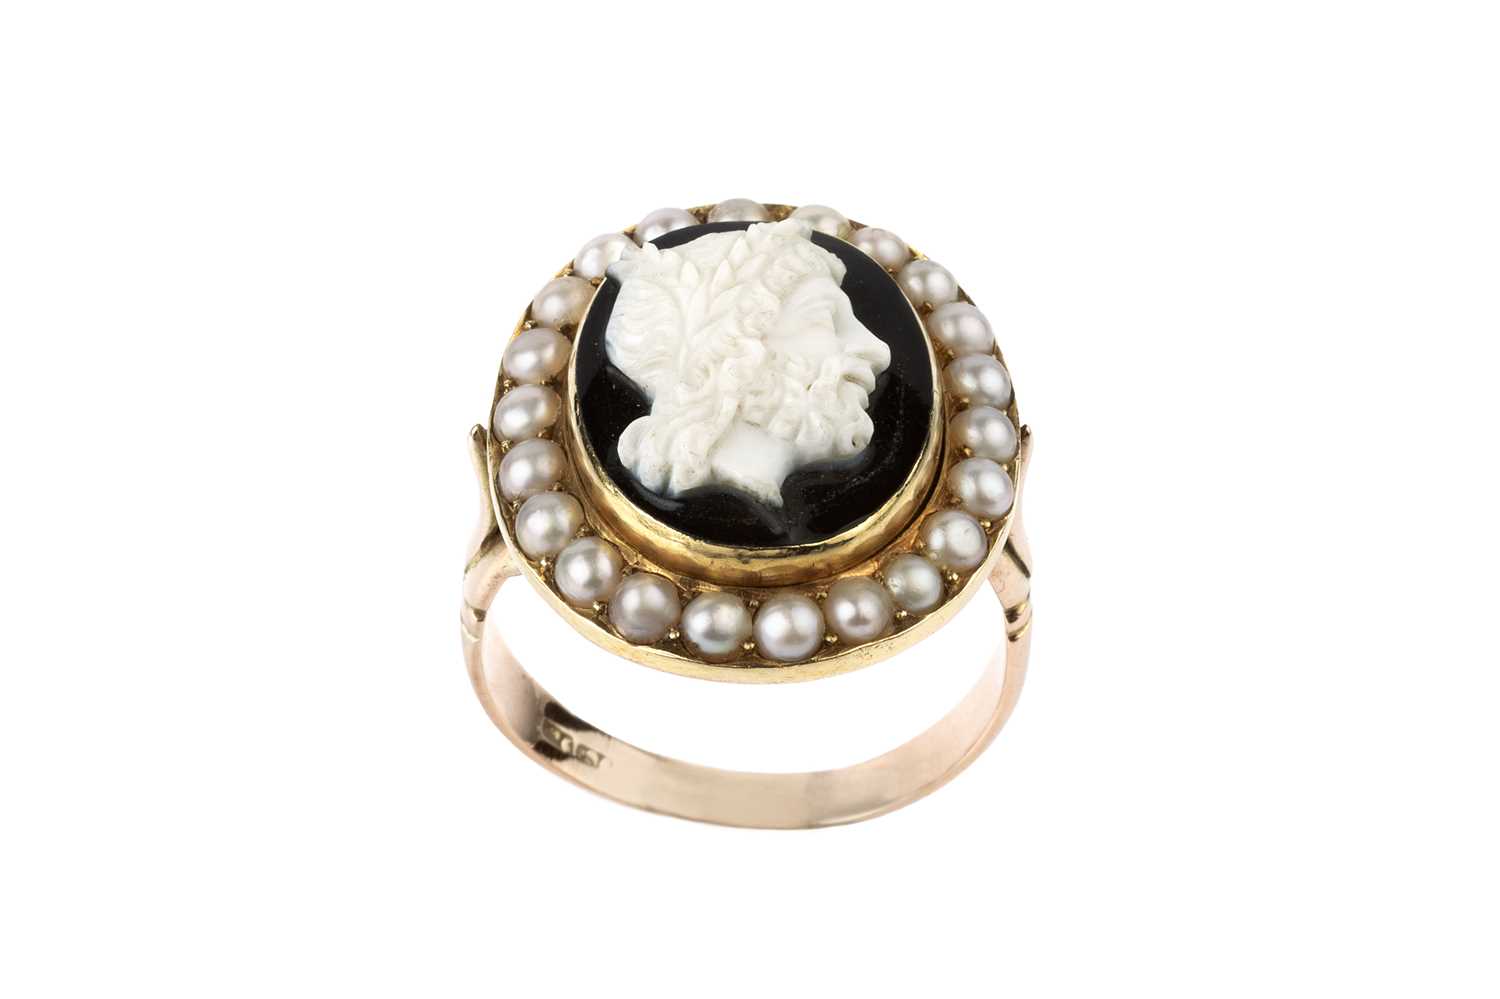 A cameo and half pearl cluster ring, the oval hardstone cameo carved to depict a classical male